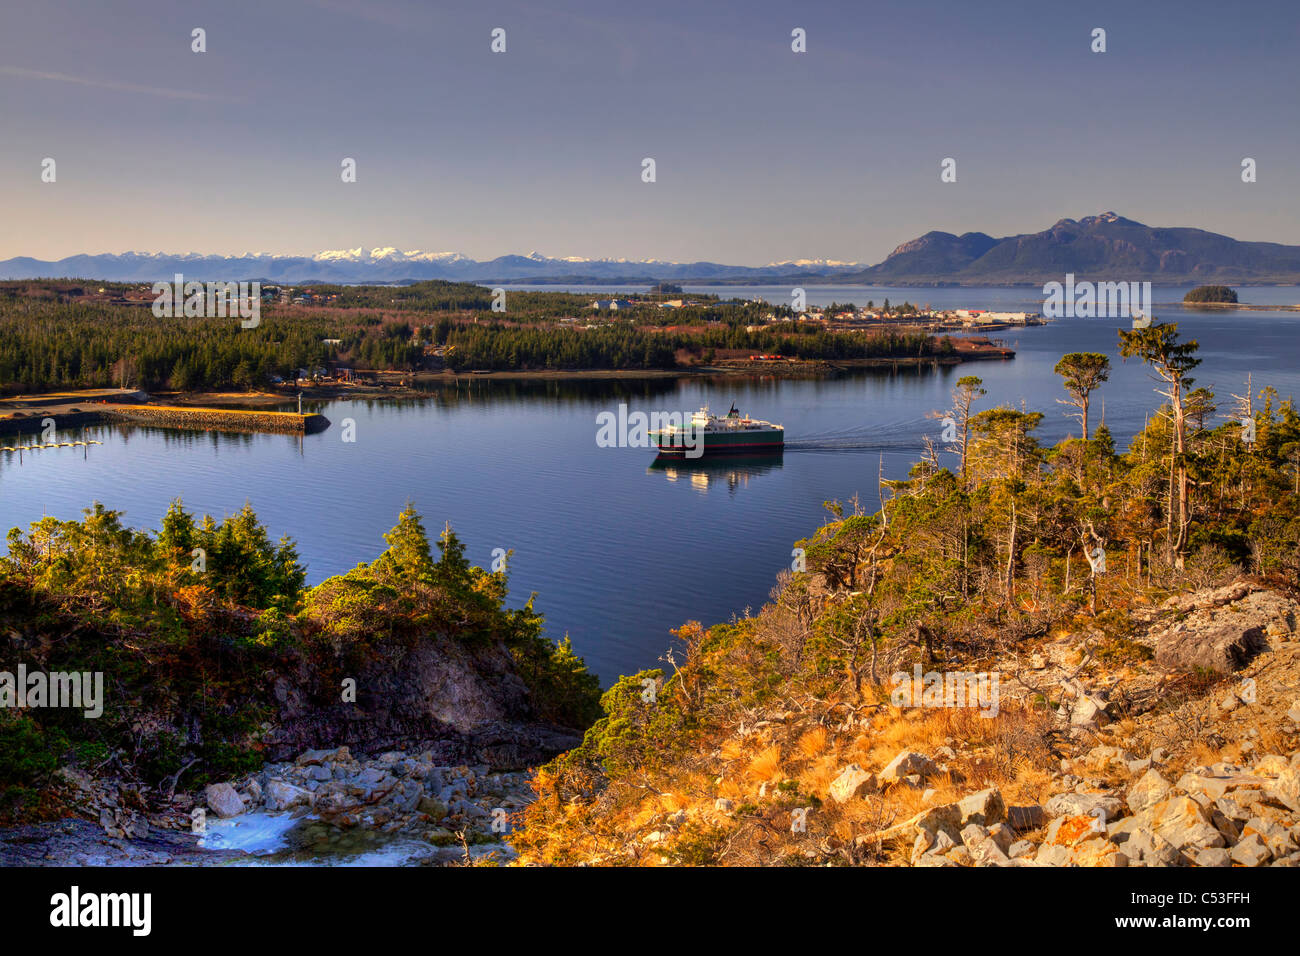 View of Metlakatla, Annette Island, and surrounding coastal area with a ferry in the foreground, Inside Passage, Alaska Stock Photo